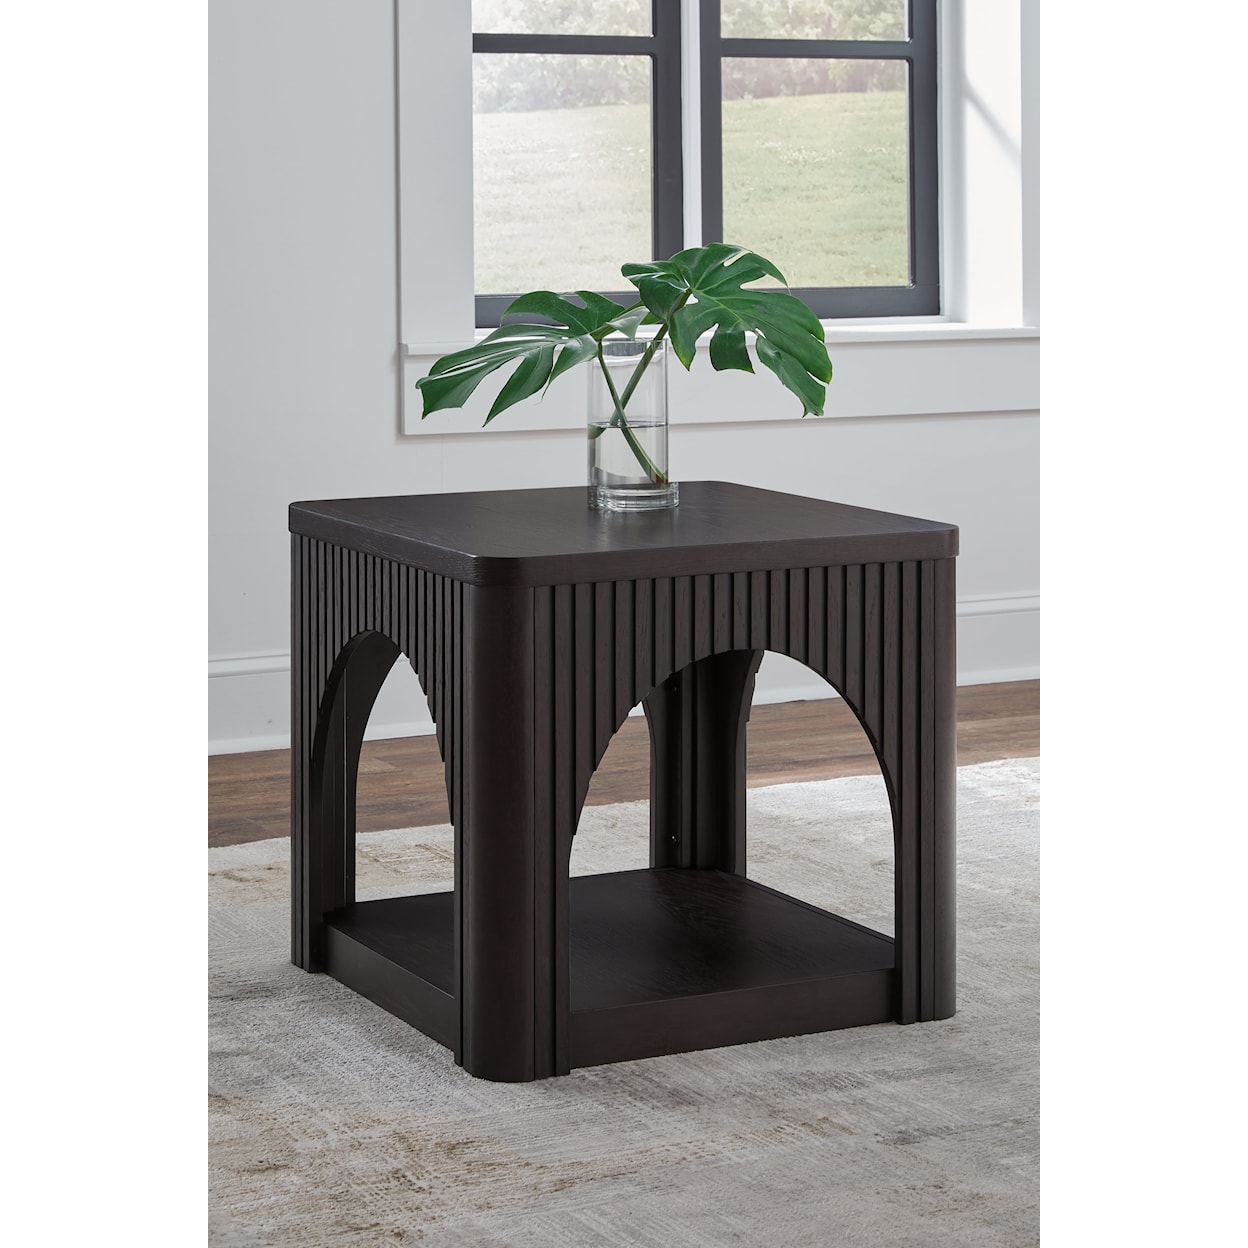 Ashley Signature Design Yellink Coffee Table and 2 End Tables